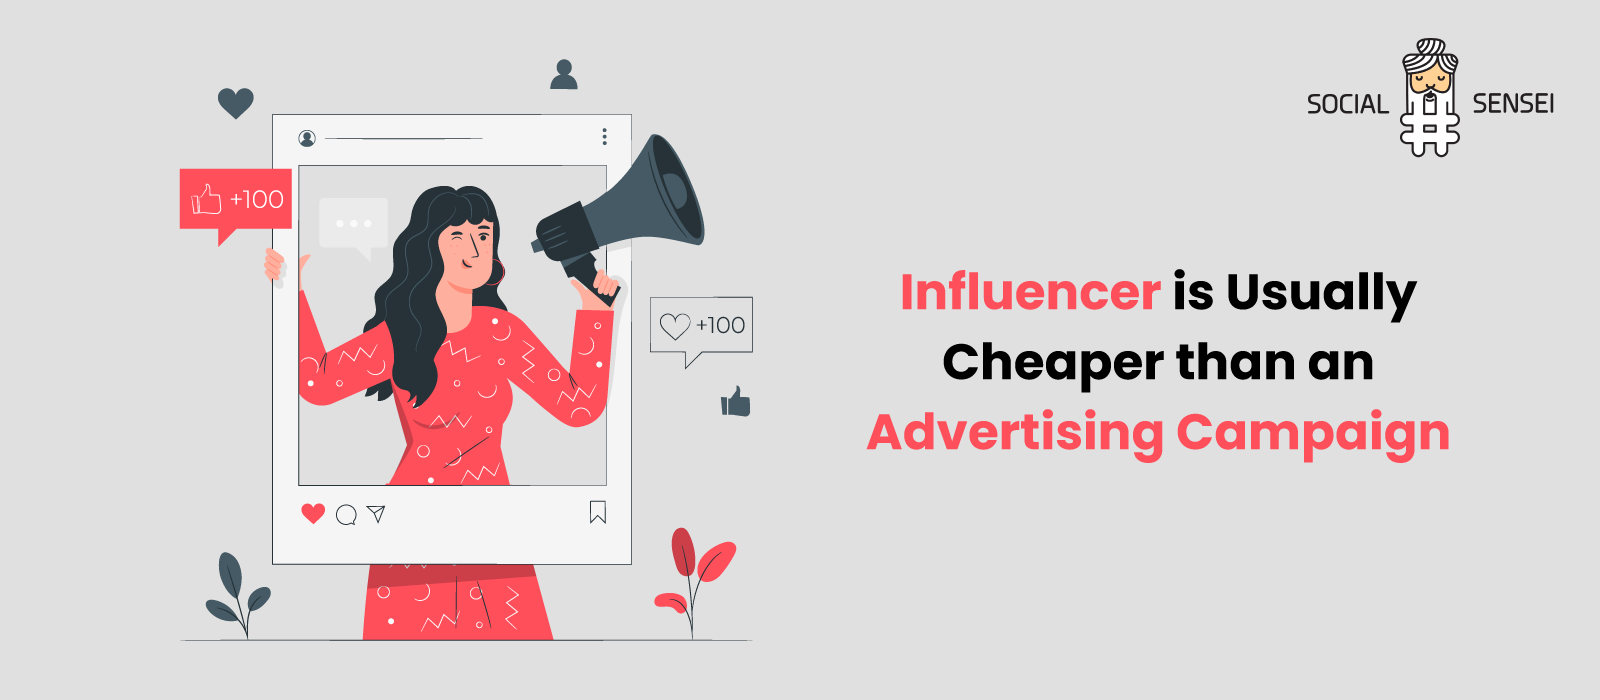 Influencer is usually Cheaper than an Advertising Campaign